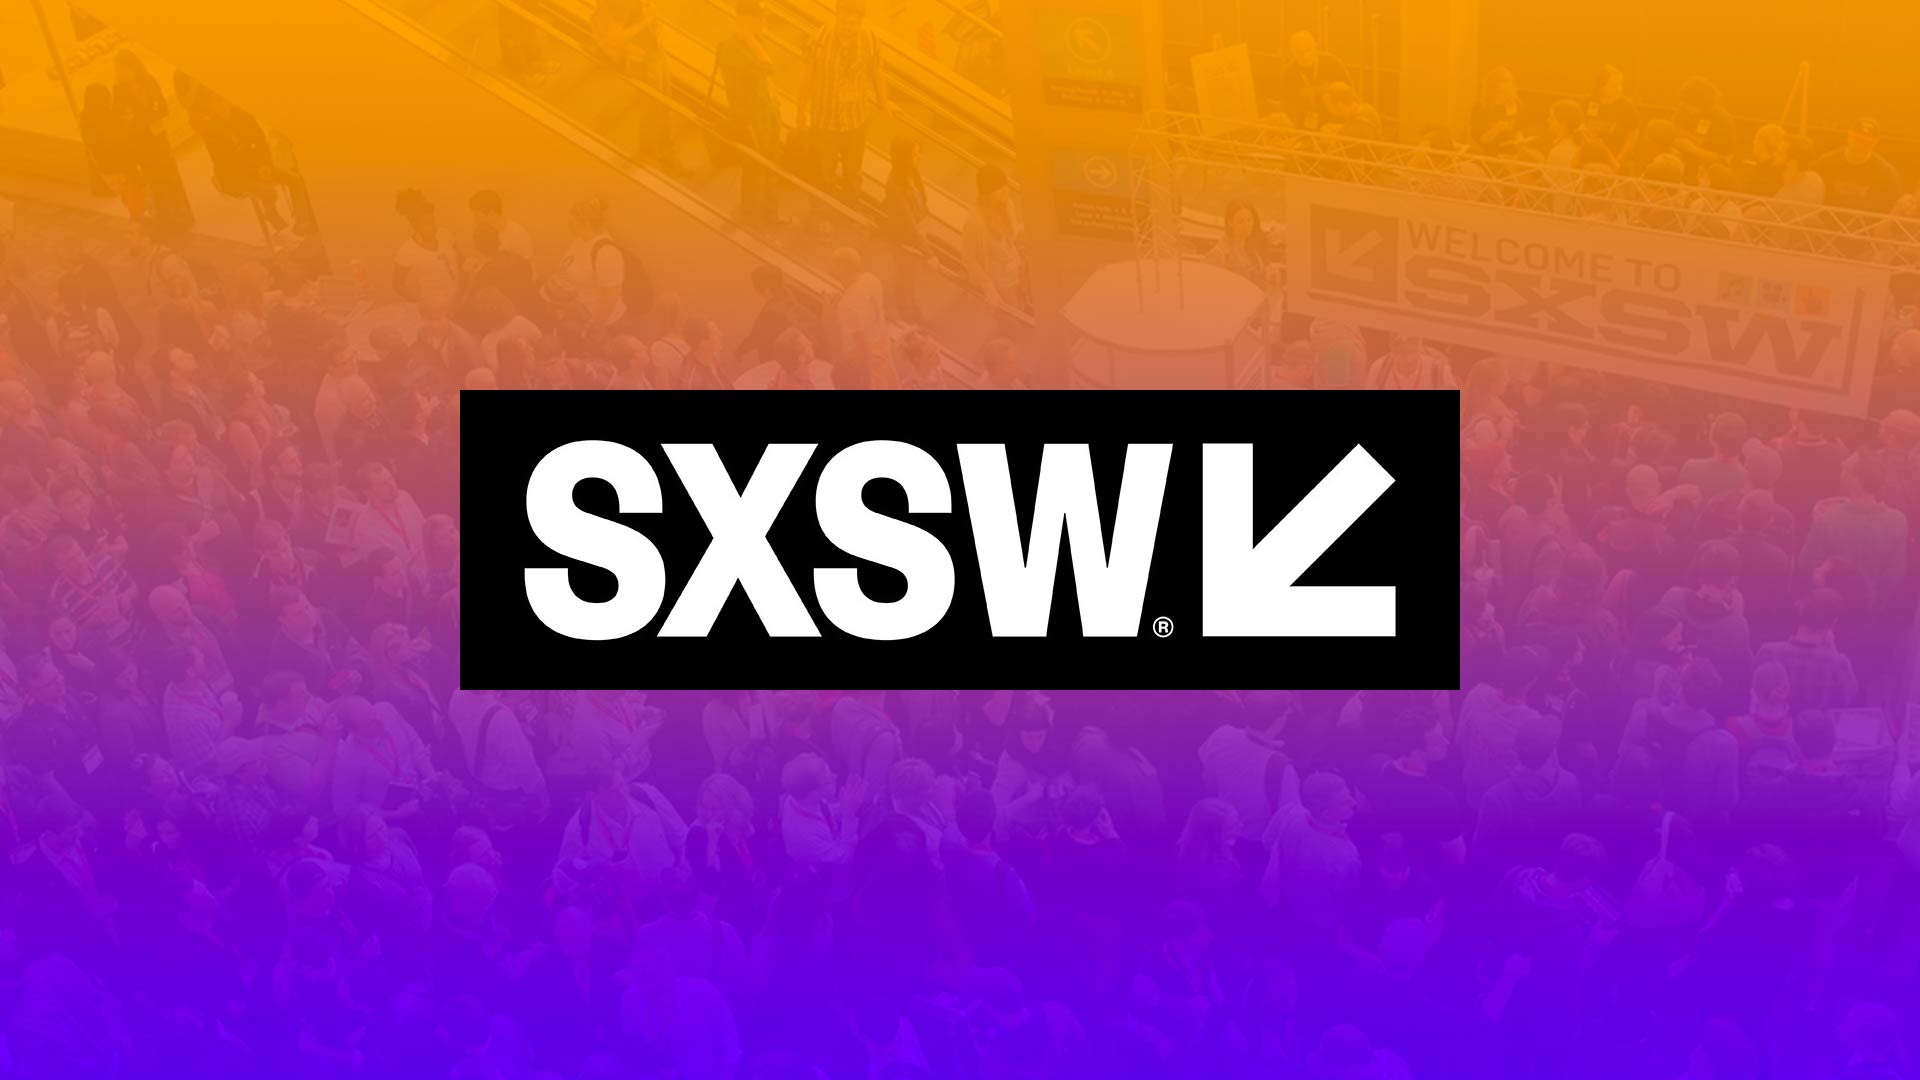 8 Sessions You Shouldn't Miss at SXSW Interactive